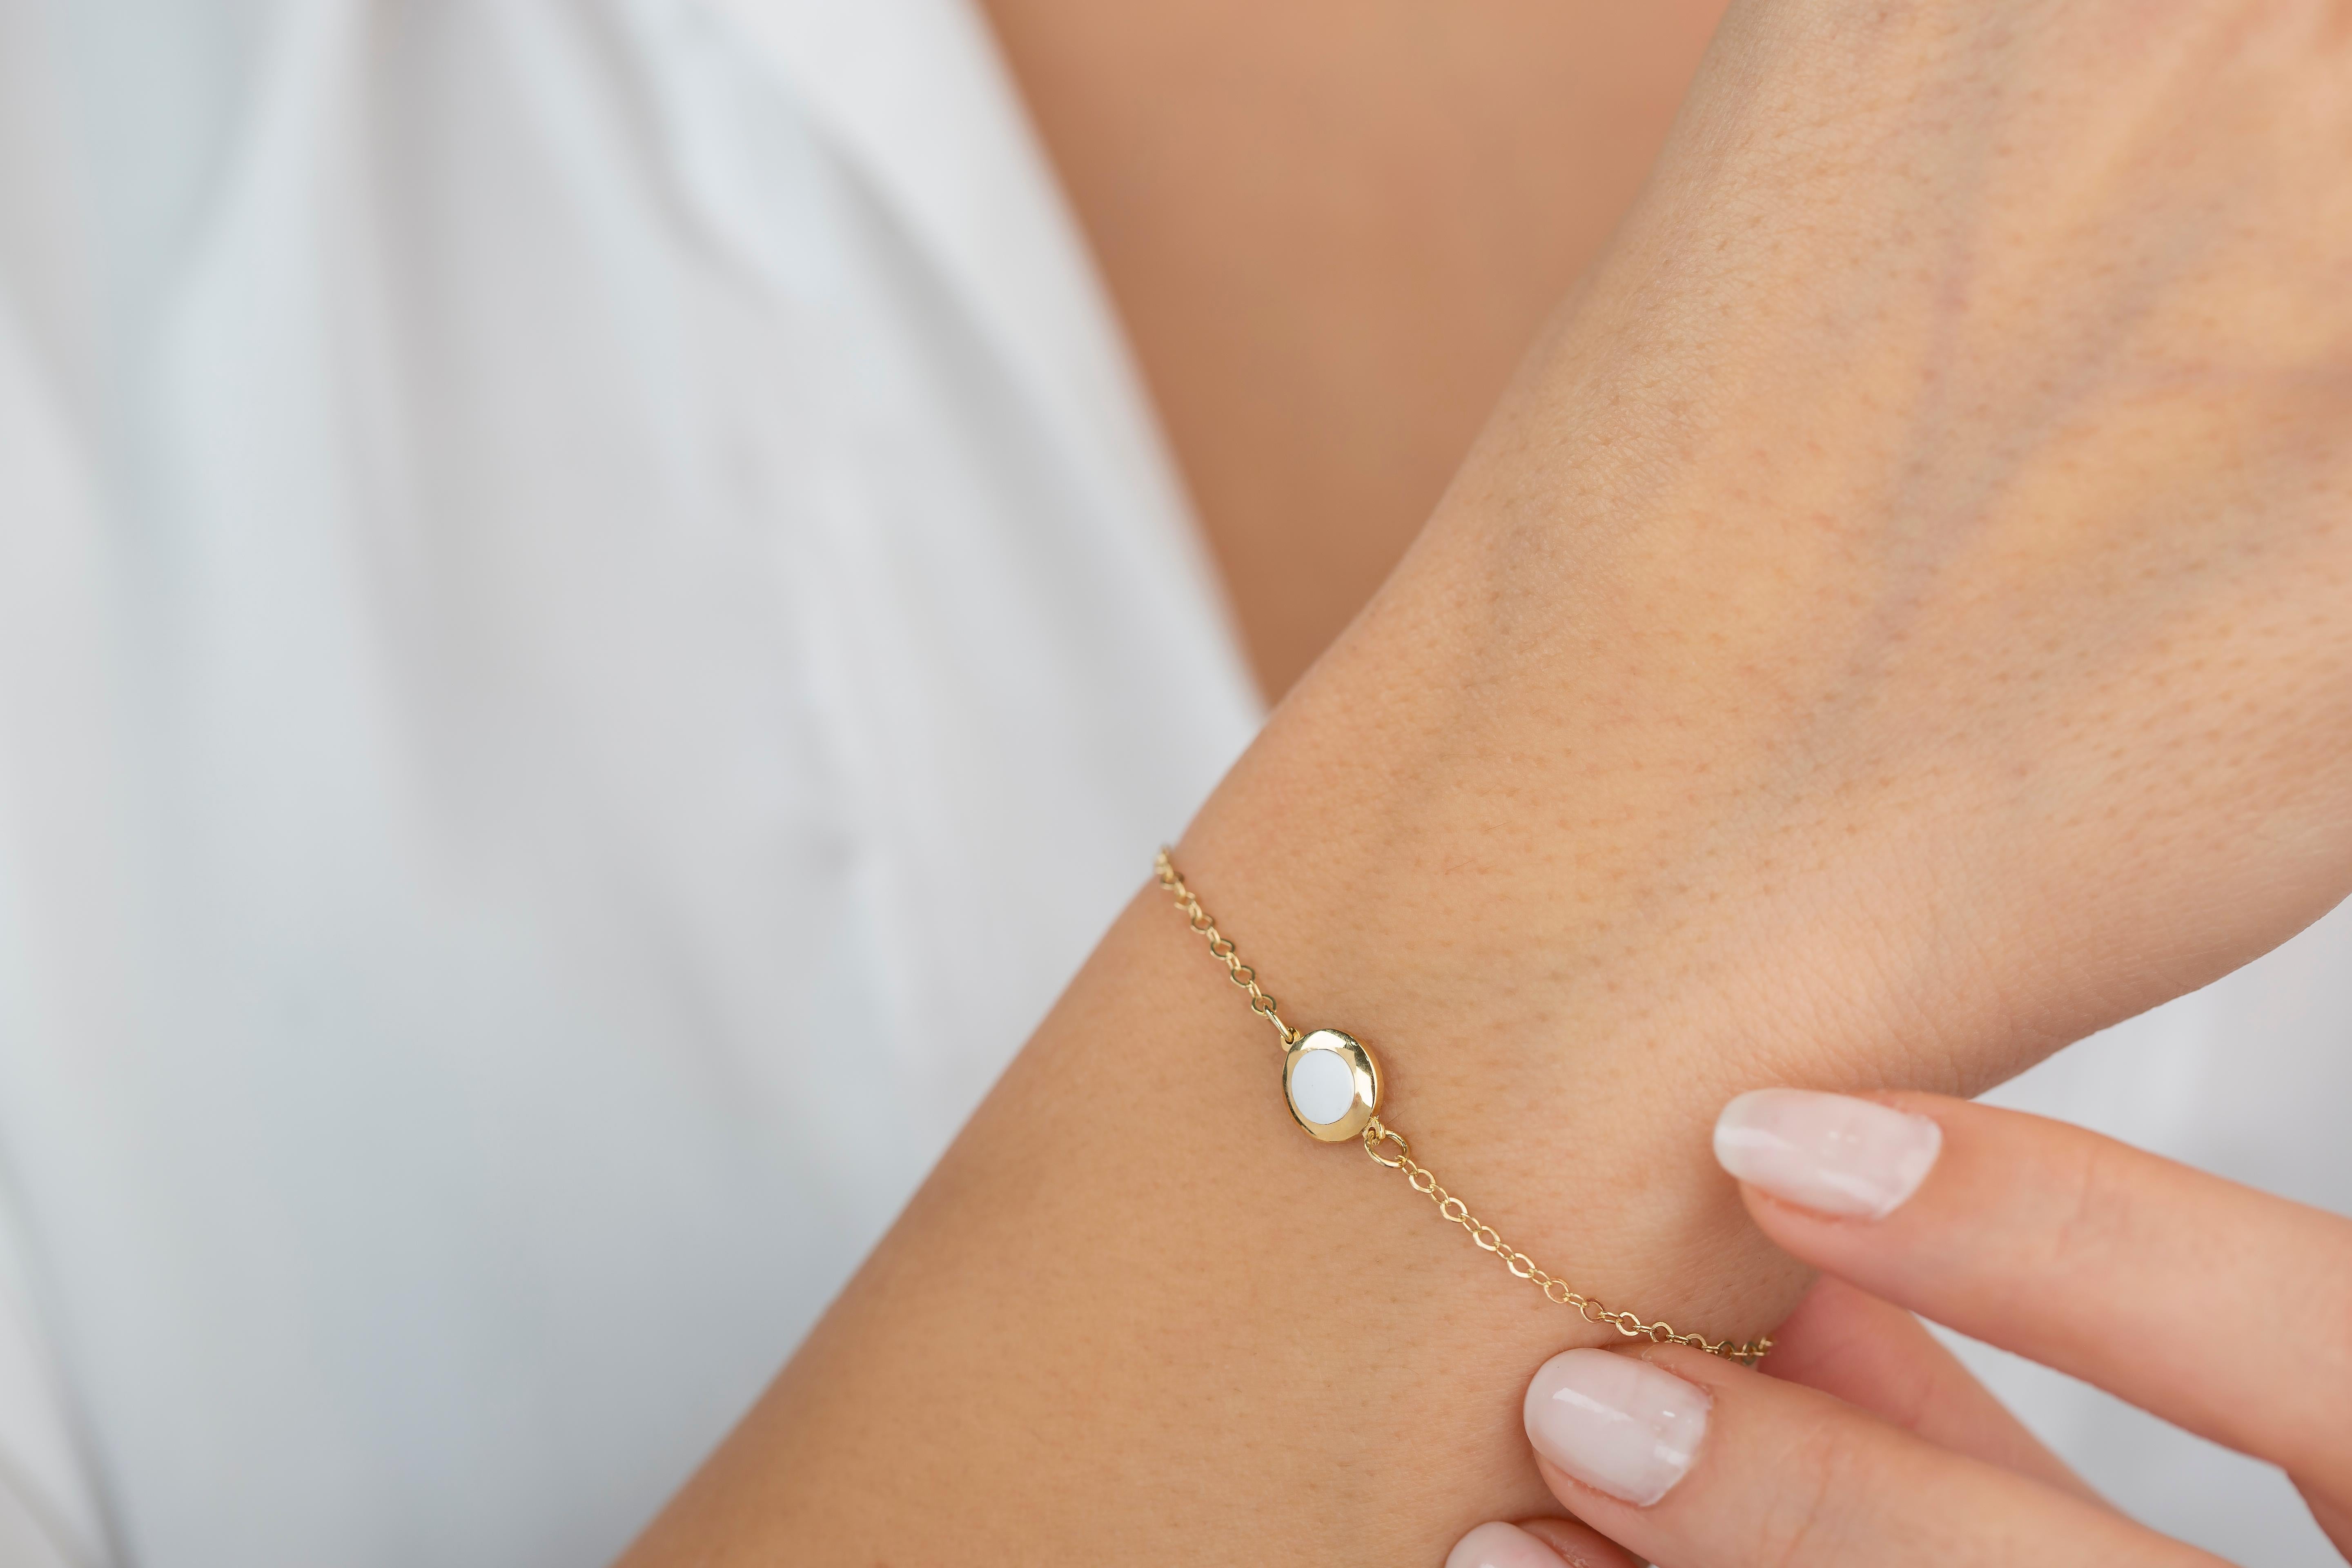 14K Gold White Enameled Round Shaped Charm Dainty Bracelet
Made of 14 ct. solid gold.
With hallmark.

Total Weight: 1,2 gr.
Size: 18.0 cm

This piece was made with quality materials and excellent handwork. I guarantee the quality assurance of my